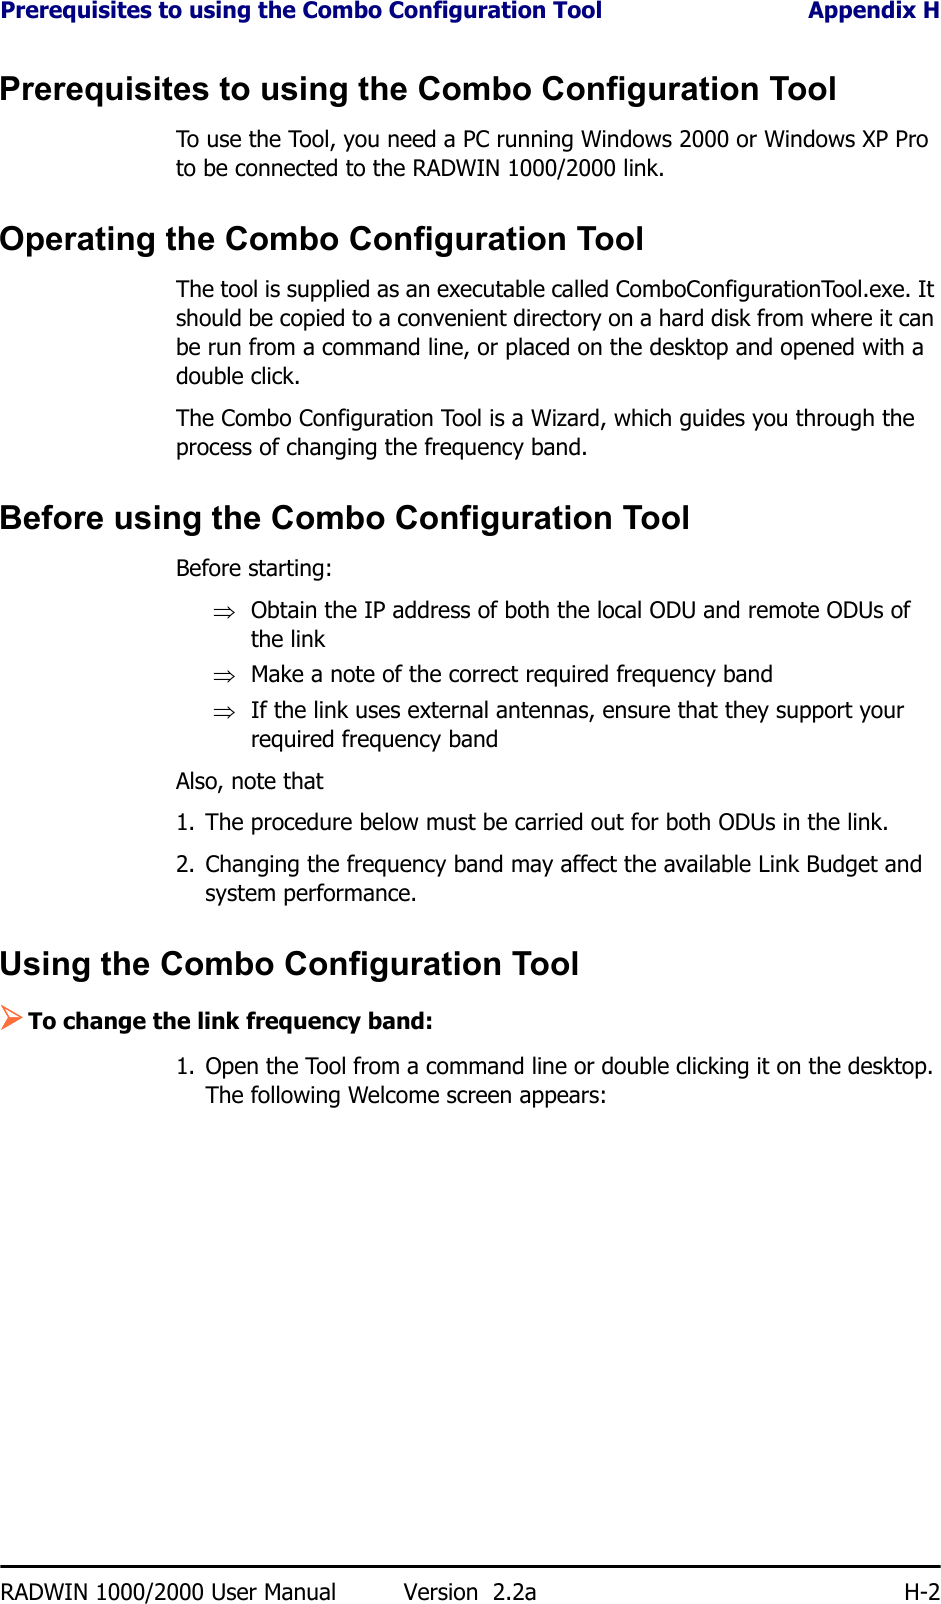 Prerequisites to using the Combo Configuration Tool Appendix HRADWIN 1000/2000 User Manual Version  2.2a H-2Prerequisites to using the Combo Configuration ToolTo use the Tool, you need a PC running Windows 2000 or Windows XP Pro to be connected to the RADWIN 1000/2000 link.Operating the Combo Configuration ToolThe tool is supplied as an executable called ComboConfigurationTool.exe. It should be copied to a convenient directory on a hard disk from where it can be run from a command line, or placed on the desktop and opened with a double click.The Combo Configuration Tool is a Wizard, which guides you through the process of changing the frequency band. Before using the Combo Configuration ToolBefore starting:⇒Obtain the IP address of both the local ODU and remote ODUs of the link⇒Make a note of the correct required frequency band⇒If the link uses external antennas, ensure that they support your required frequency bandAlso, note that1. The procedure below must be carried out for both ODUs in the link.2. Changing the frequency band may affect the available Link Budget and system performance.Using the Combo Configuration Tool¾To change the link frequency band:1. Open the Tool from a command line or double clicking it on the desktop. The following Welcome screen appears: